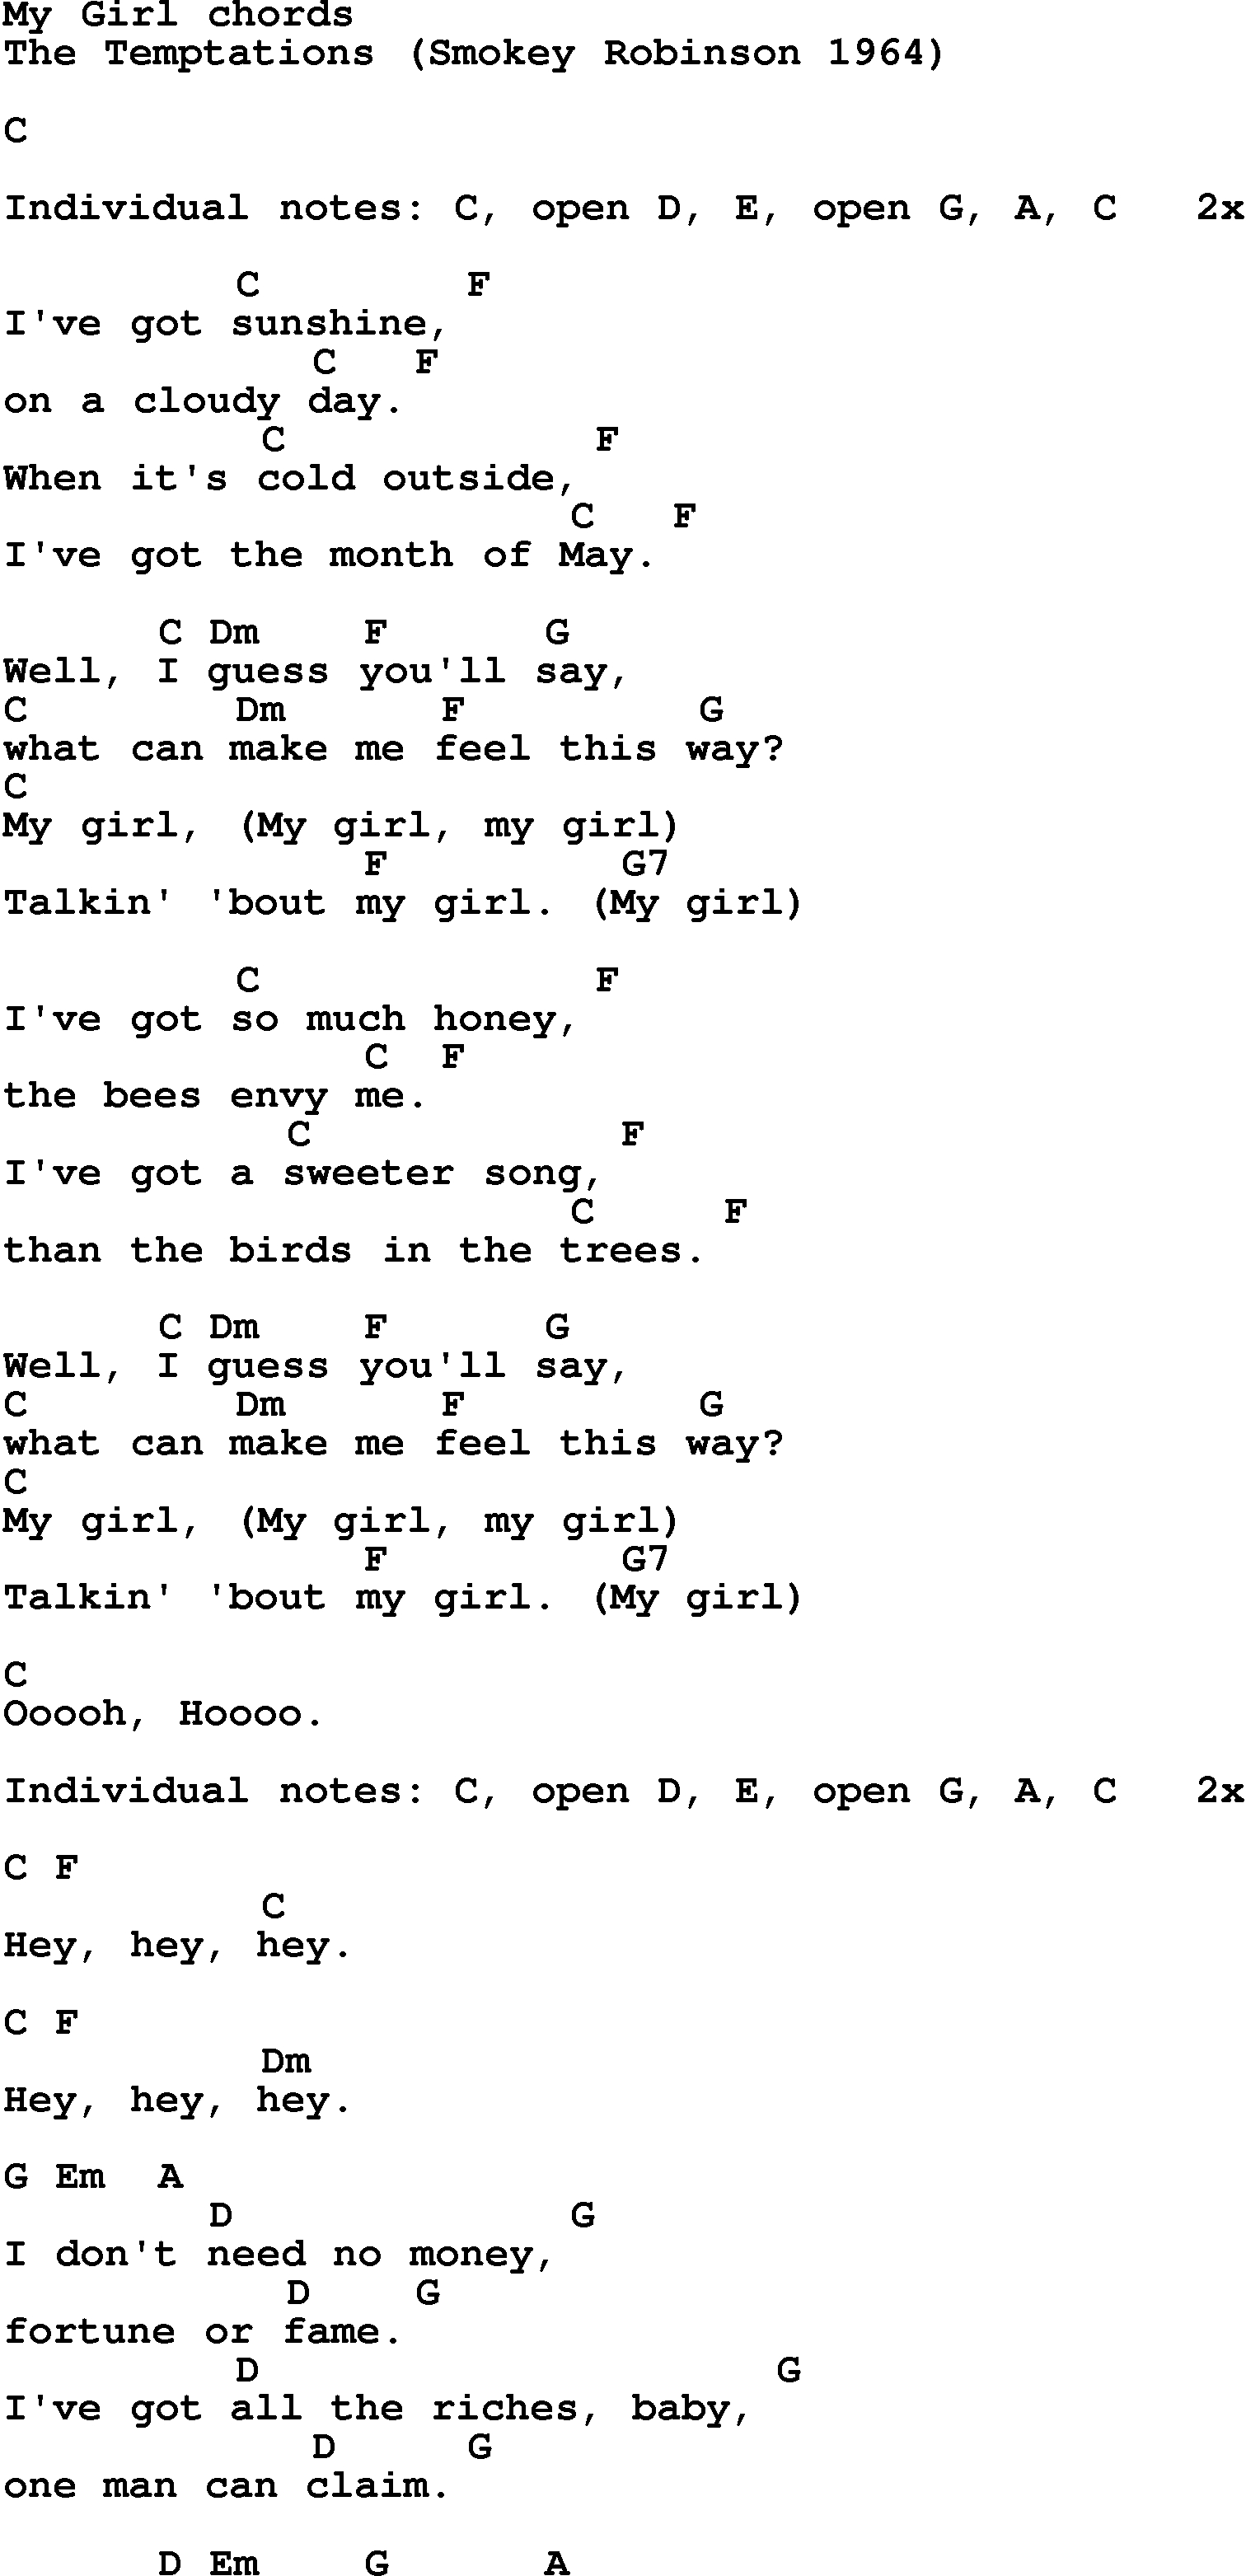 My Girl Chords Song Lyrics With Guitar Chords For My Girl